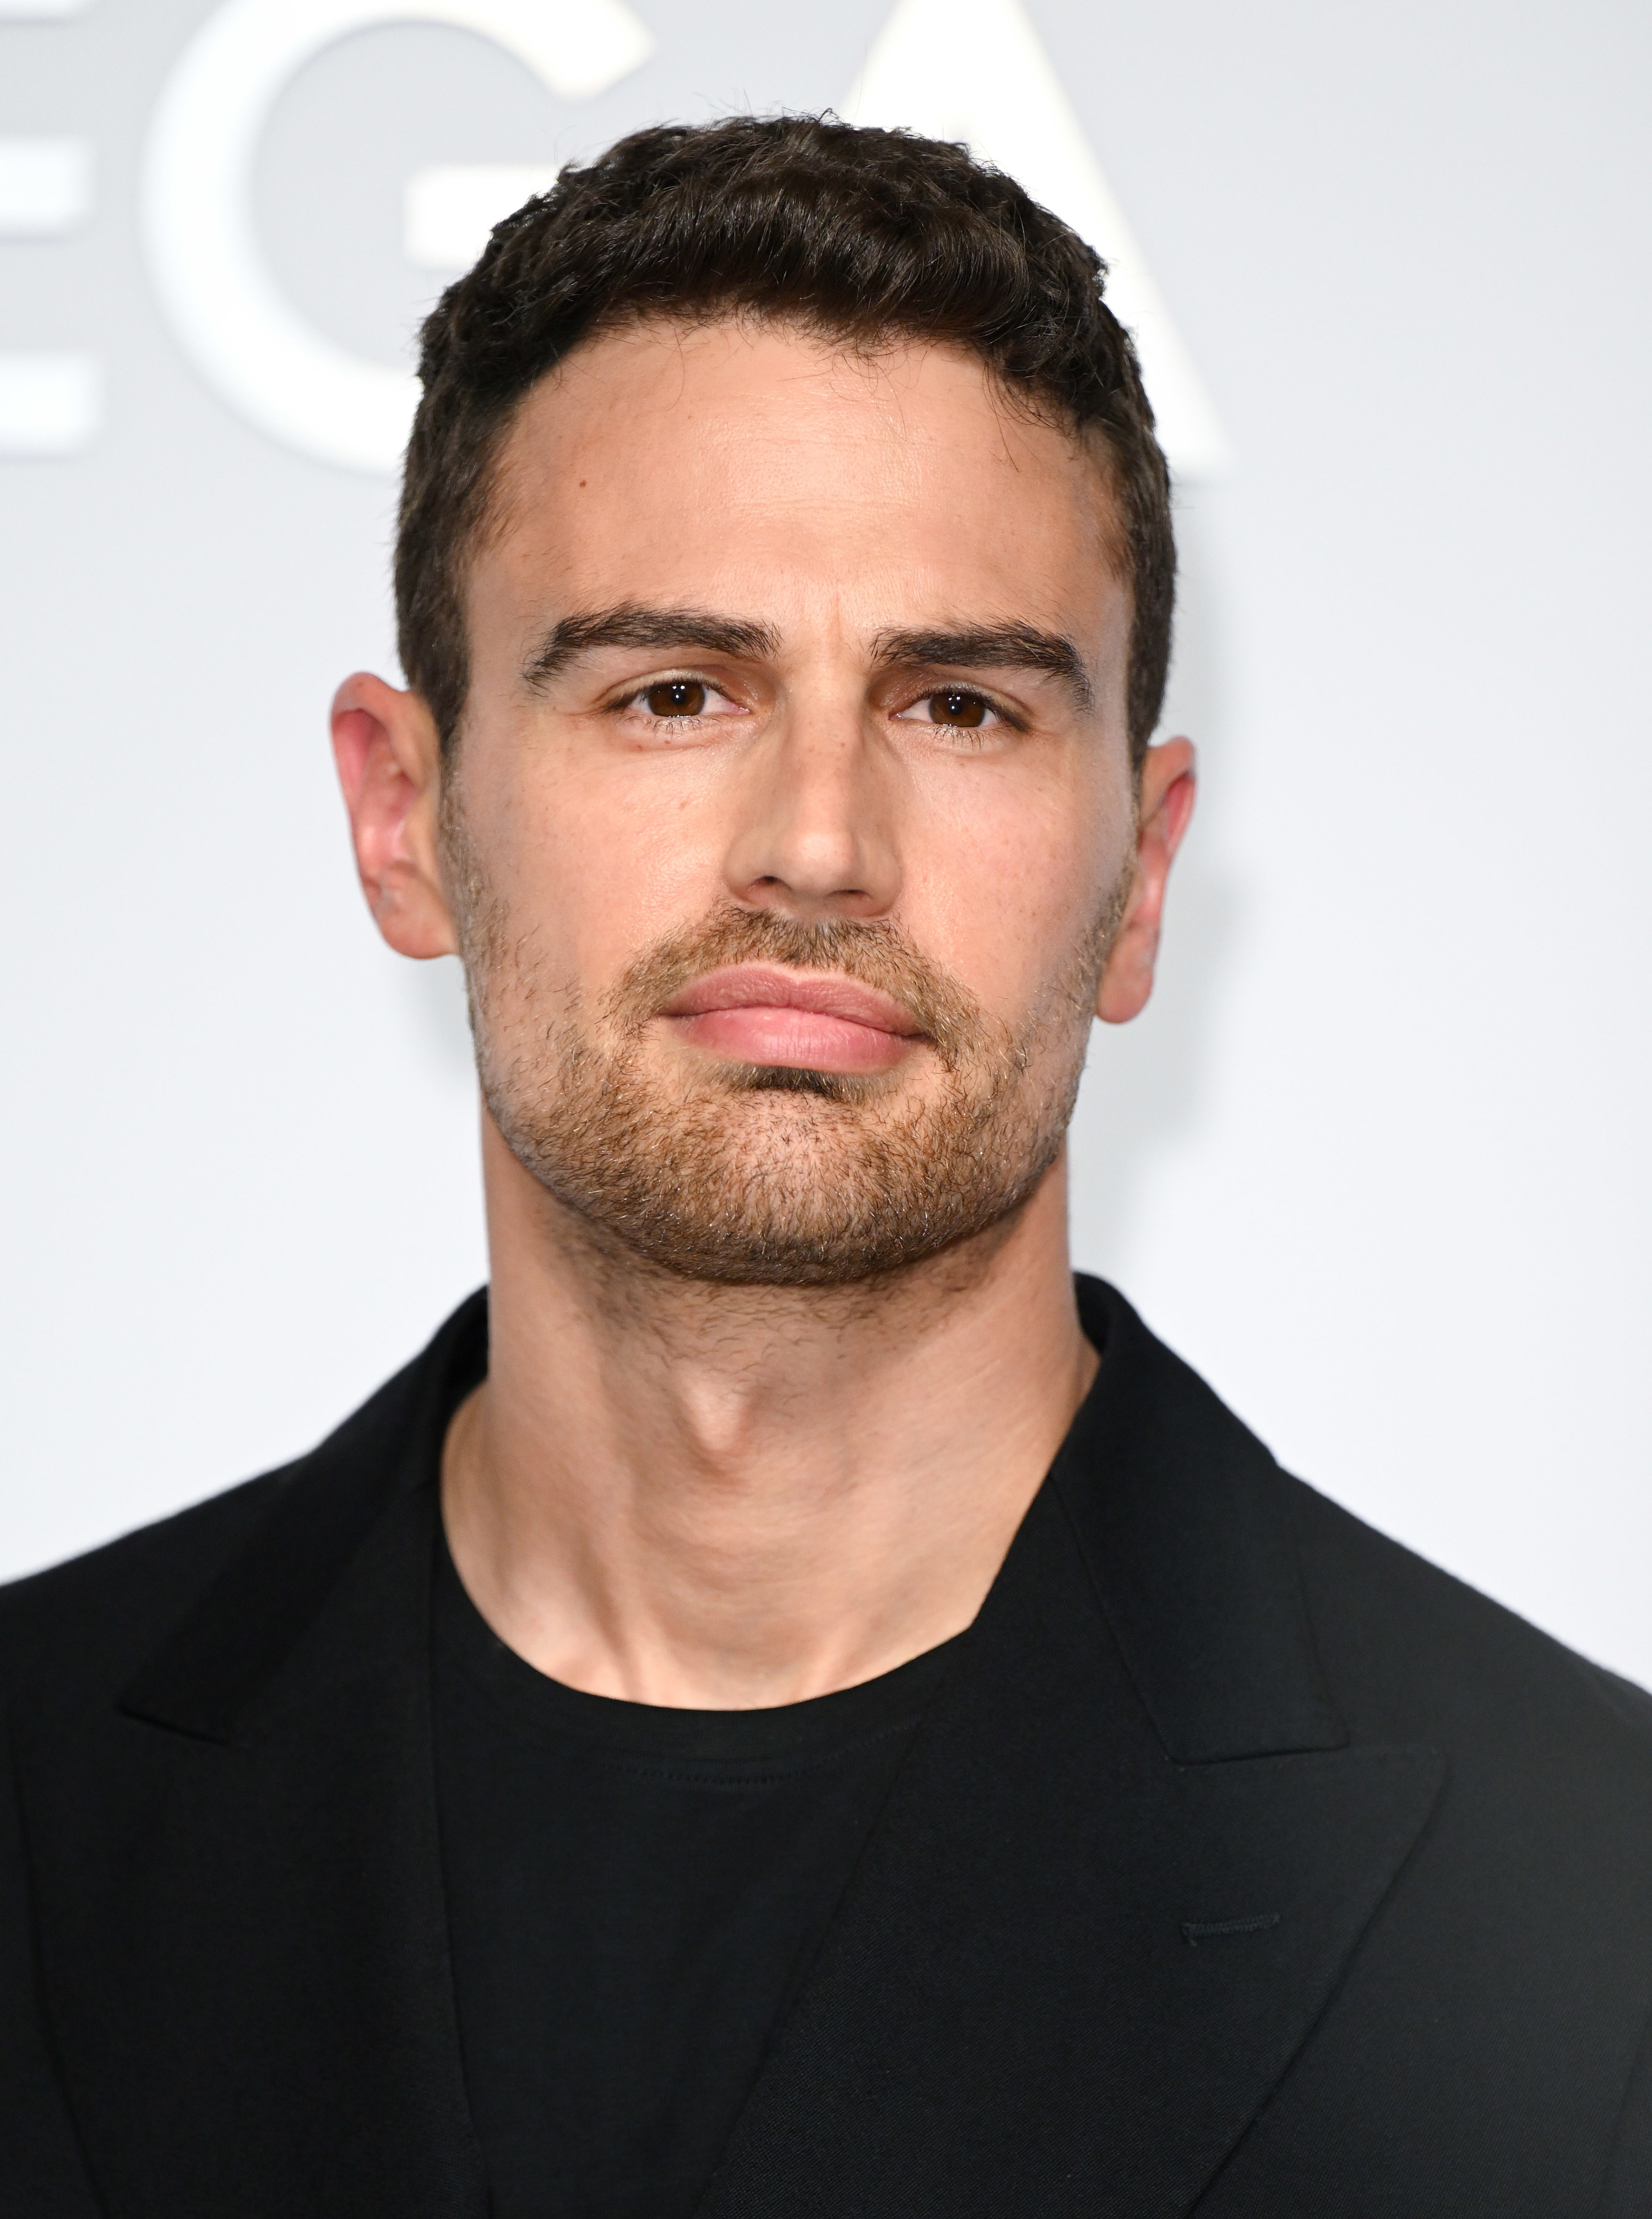 A close-up of Theo James